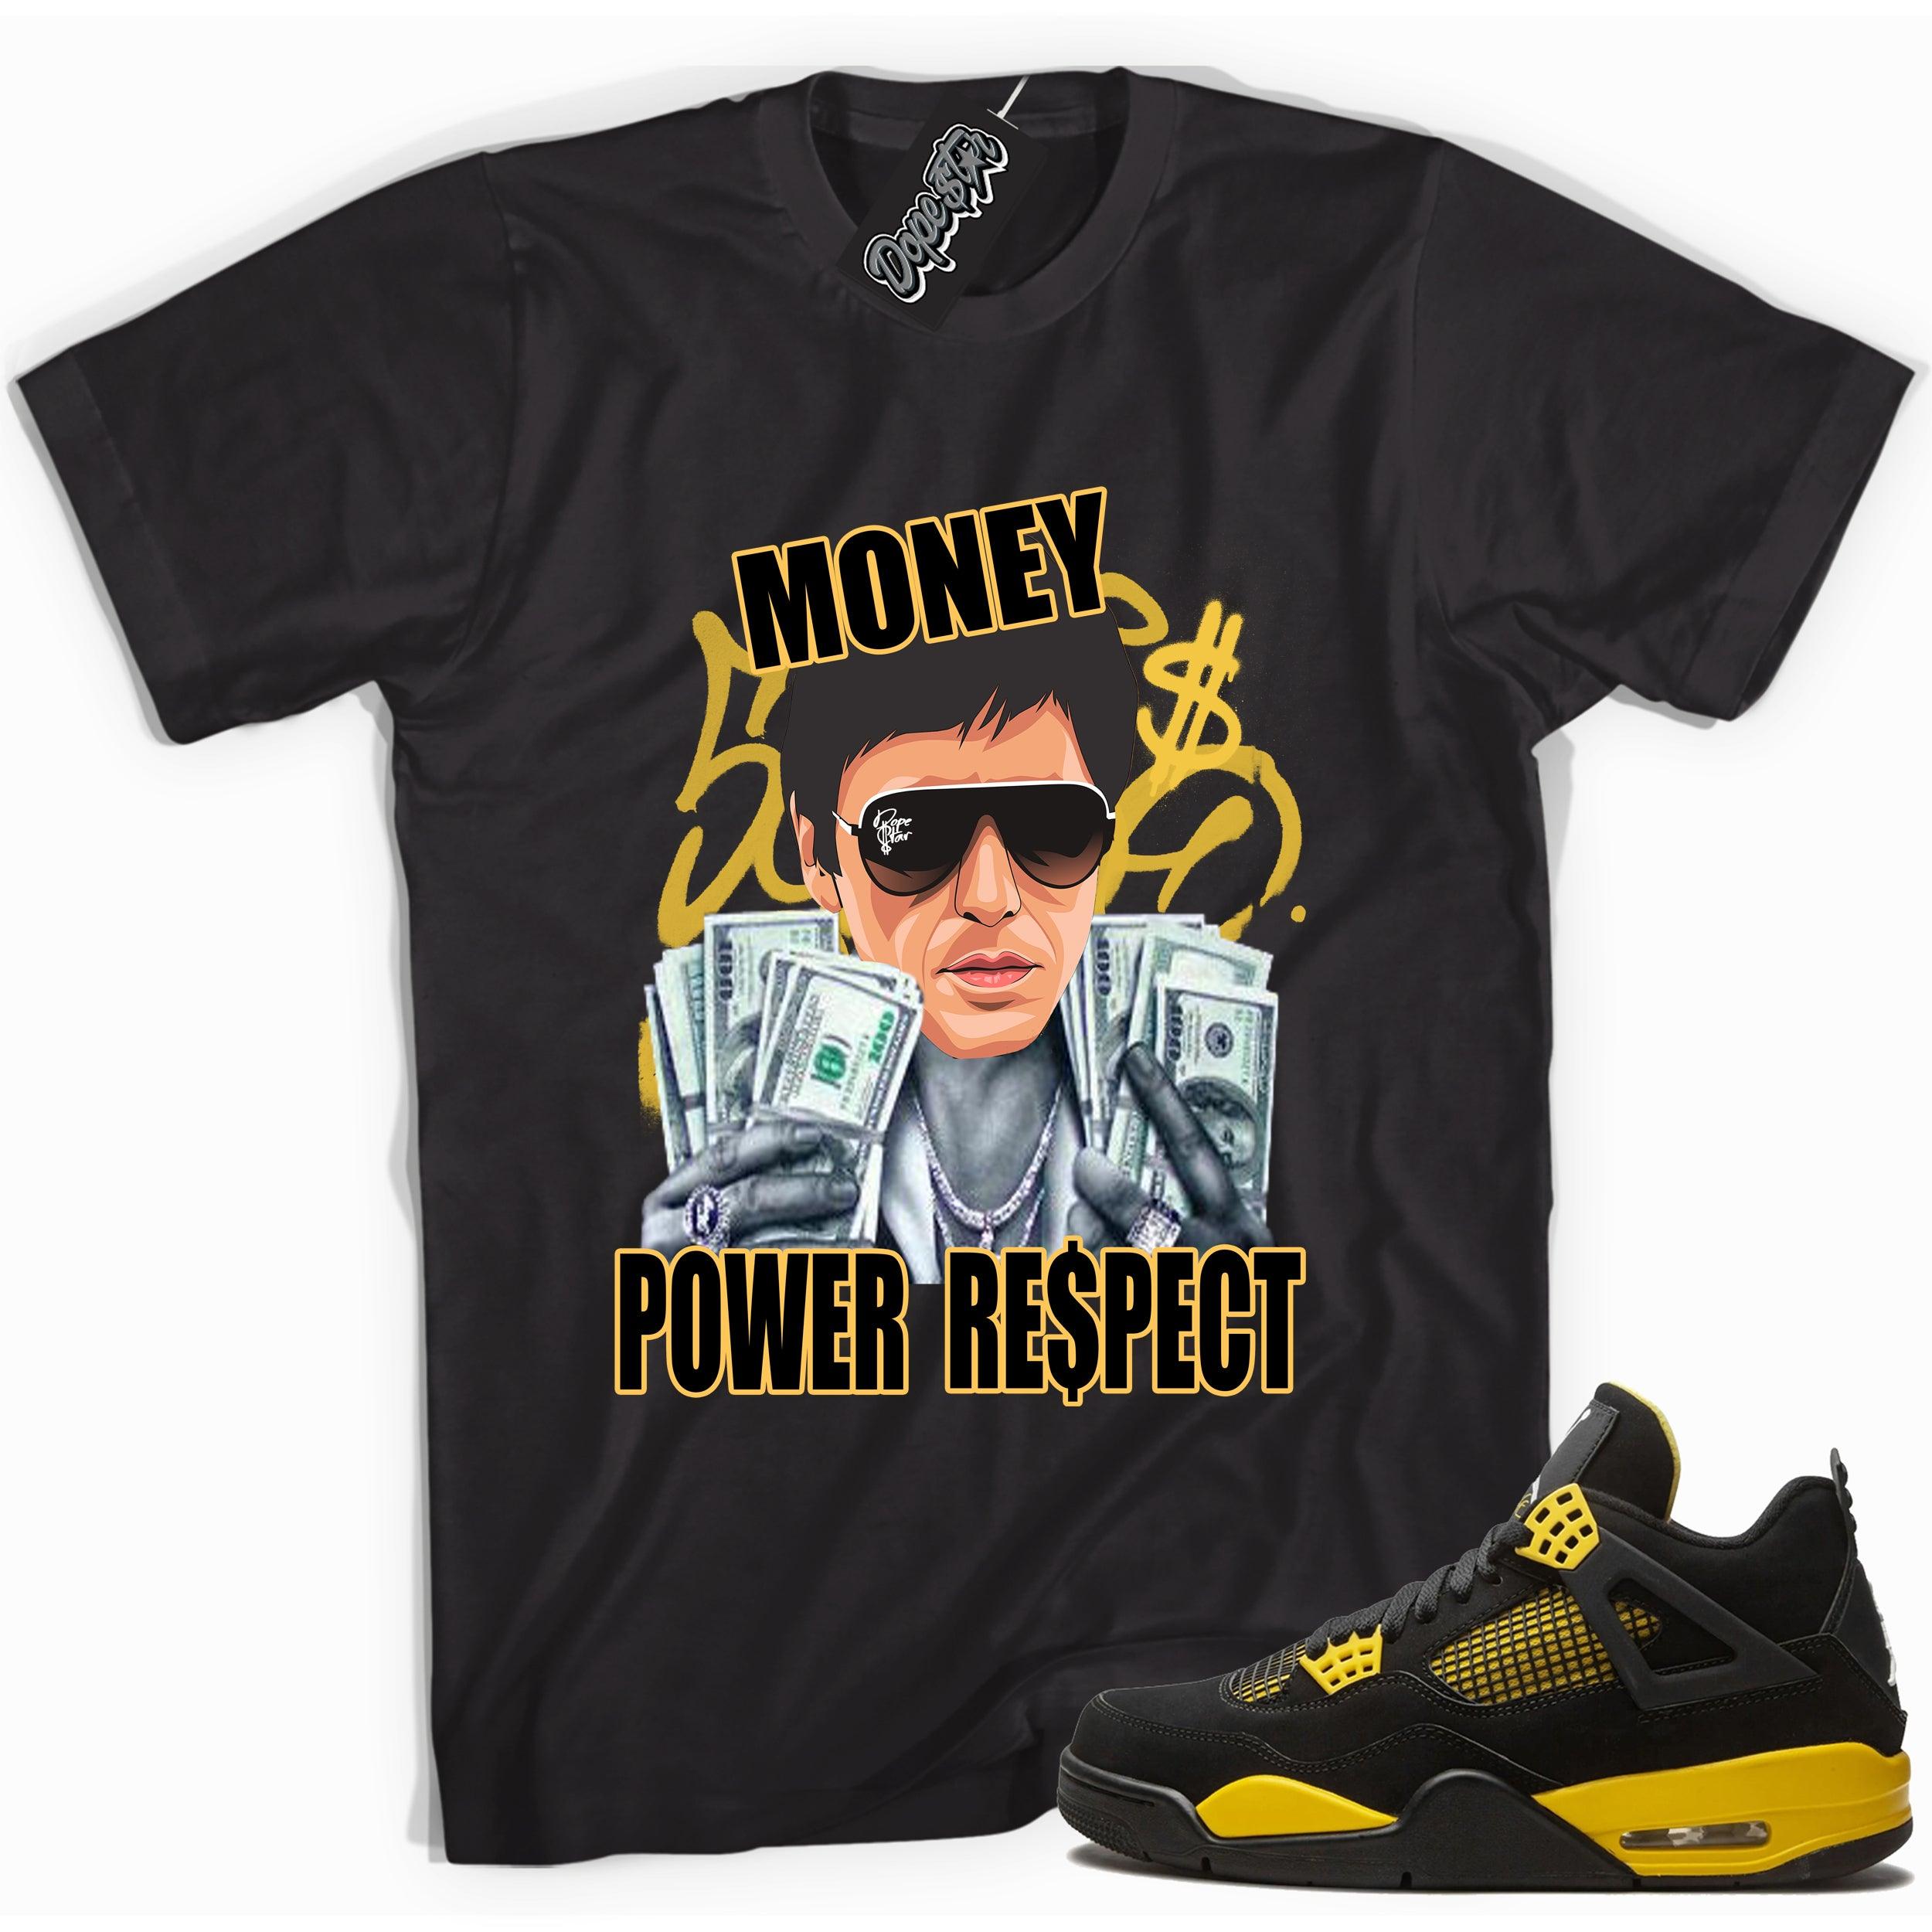 Cool black graphic tee with 'money power respect tony montana' print, that perfectly matches  Air Jordan 4 Thunder sneakers